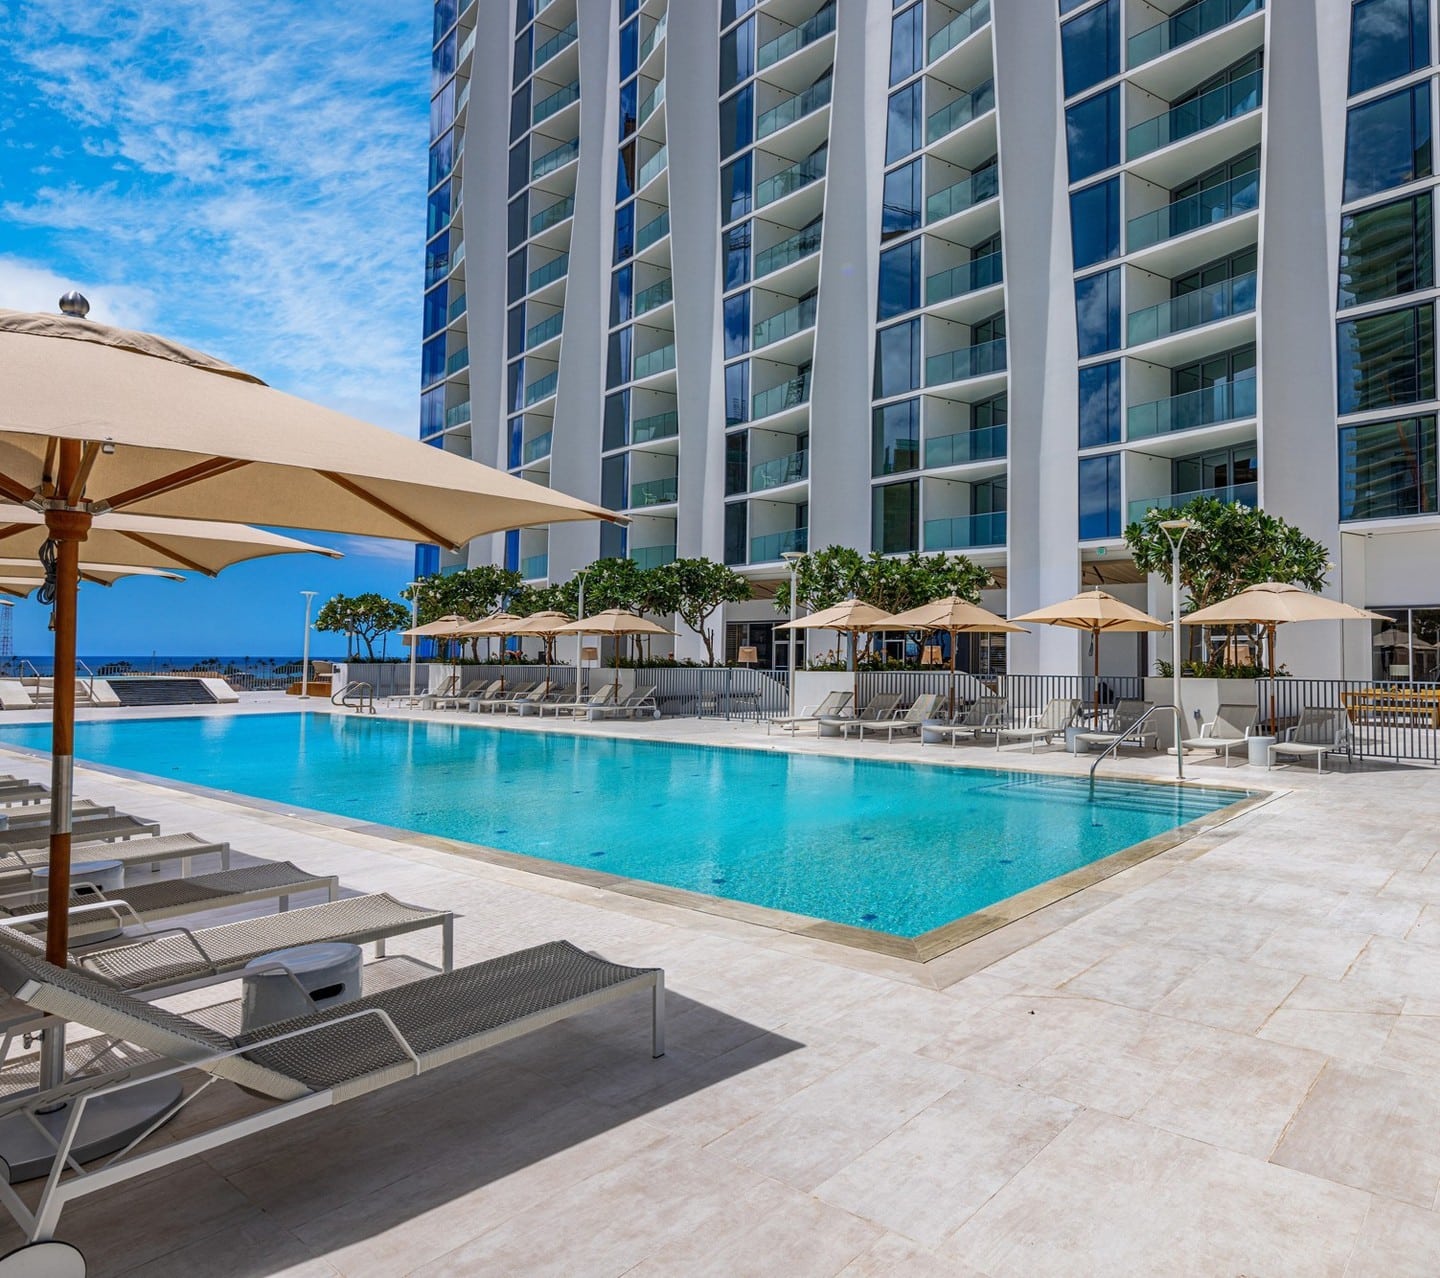 At Kōʻula, experience thoughtfully designed leisure and amenity spaces on the Level 8 Deck. Visit the link in our bio to learn more about the Sunset Lounge, resort-style pool and spas, and fitness center.